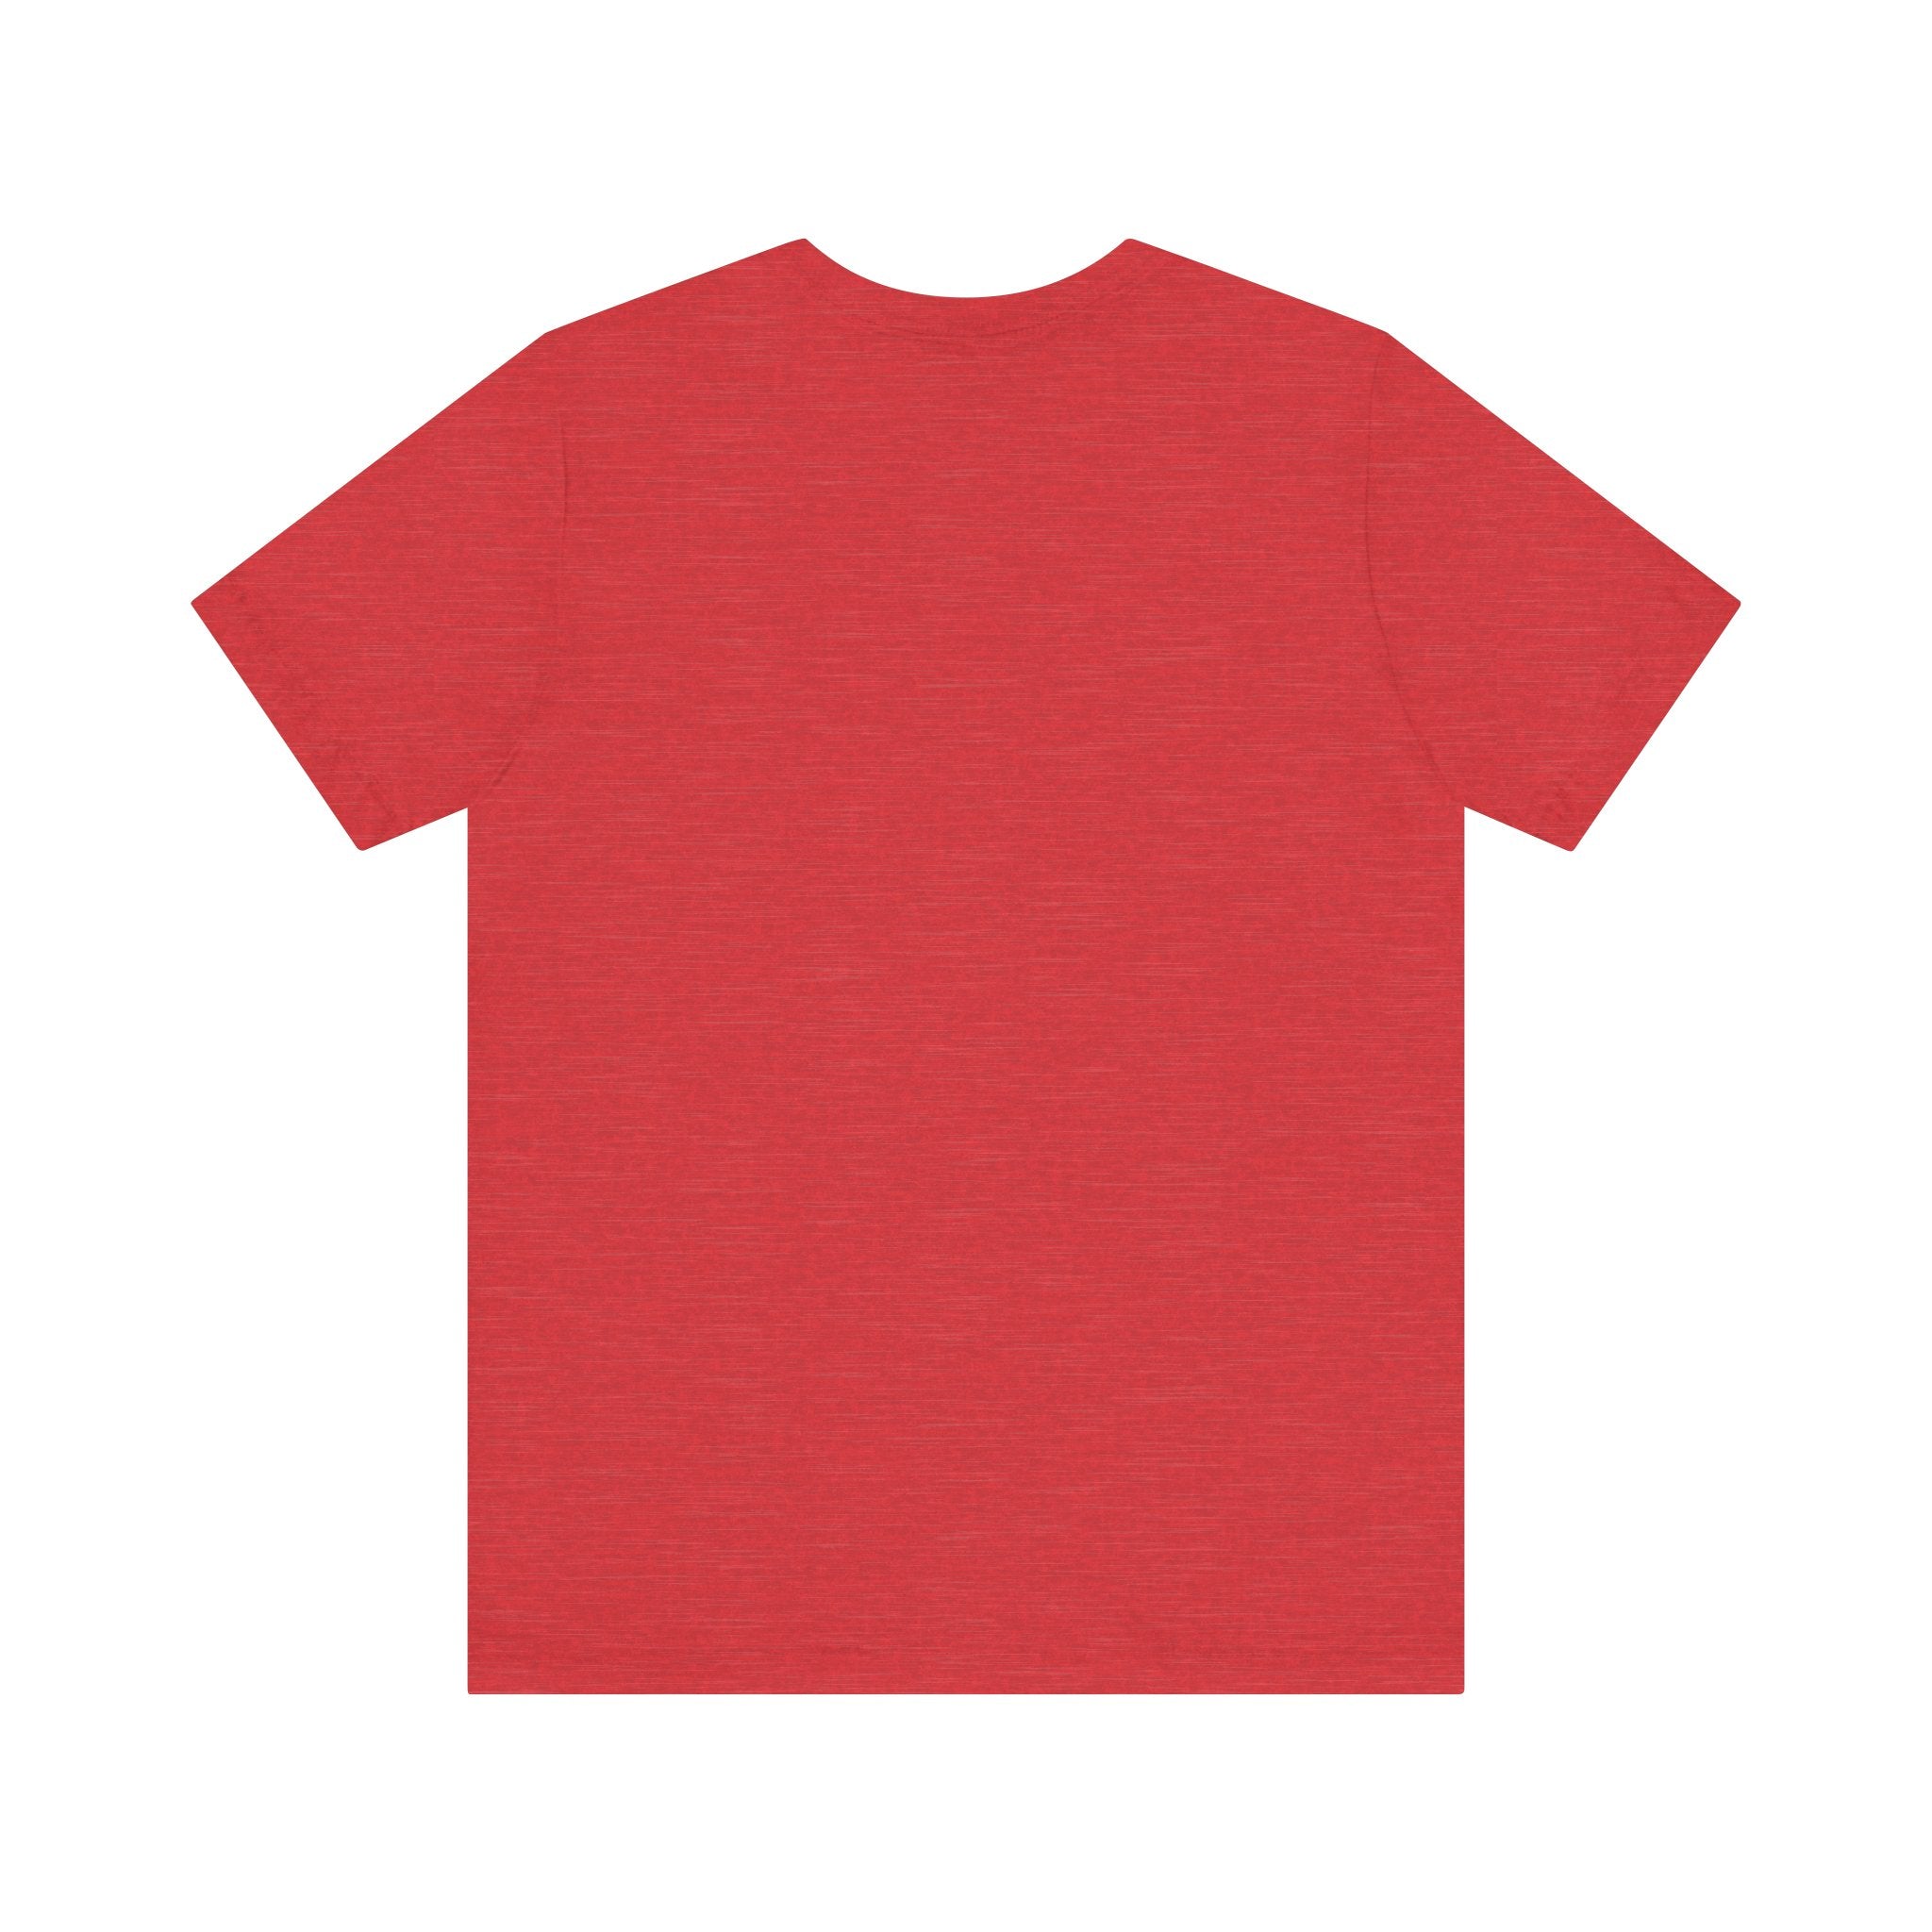 A fashionable, plain red short-sleeved C-Ho-Co-La-Te - T-Shirt made from 100% Airlume cotton.